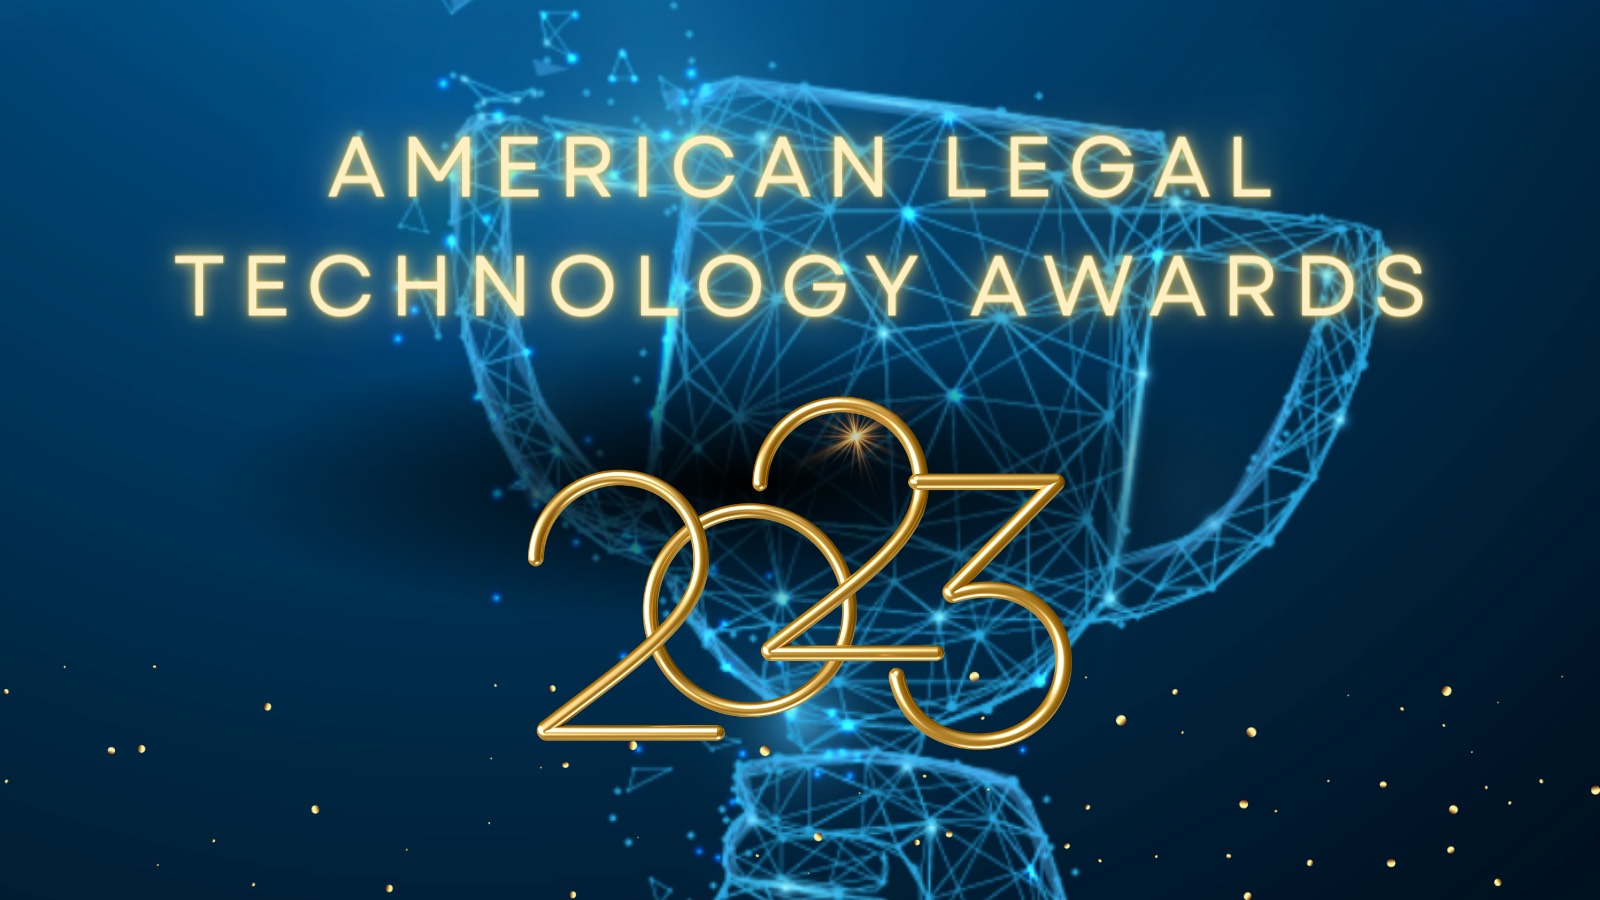 Nominations Open for 2023 American Legal Technology Awards, to be Presented at Gala Dinner in October